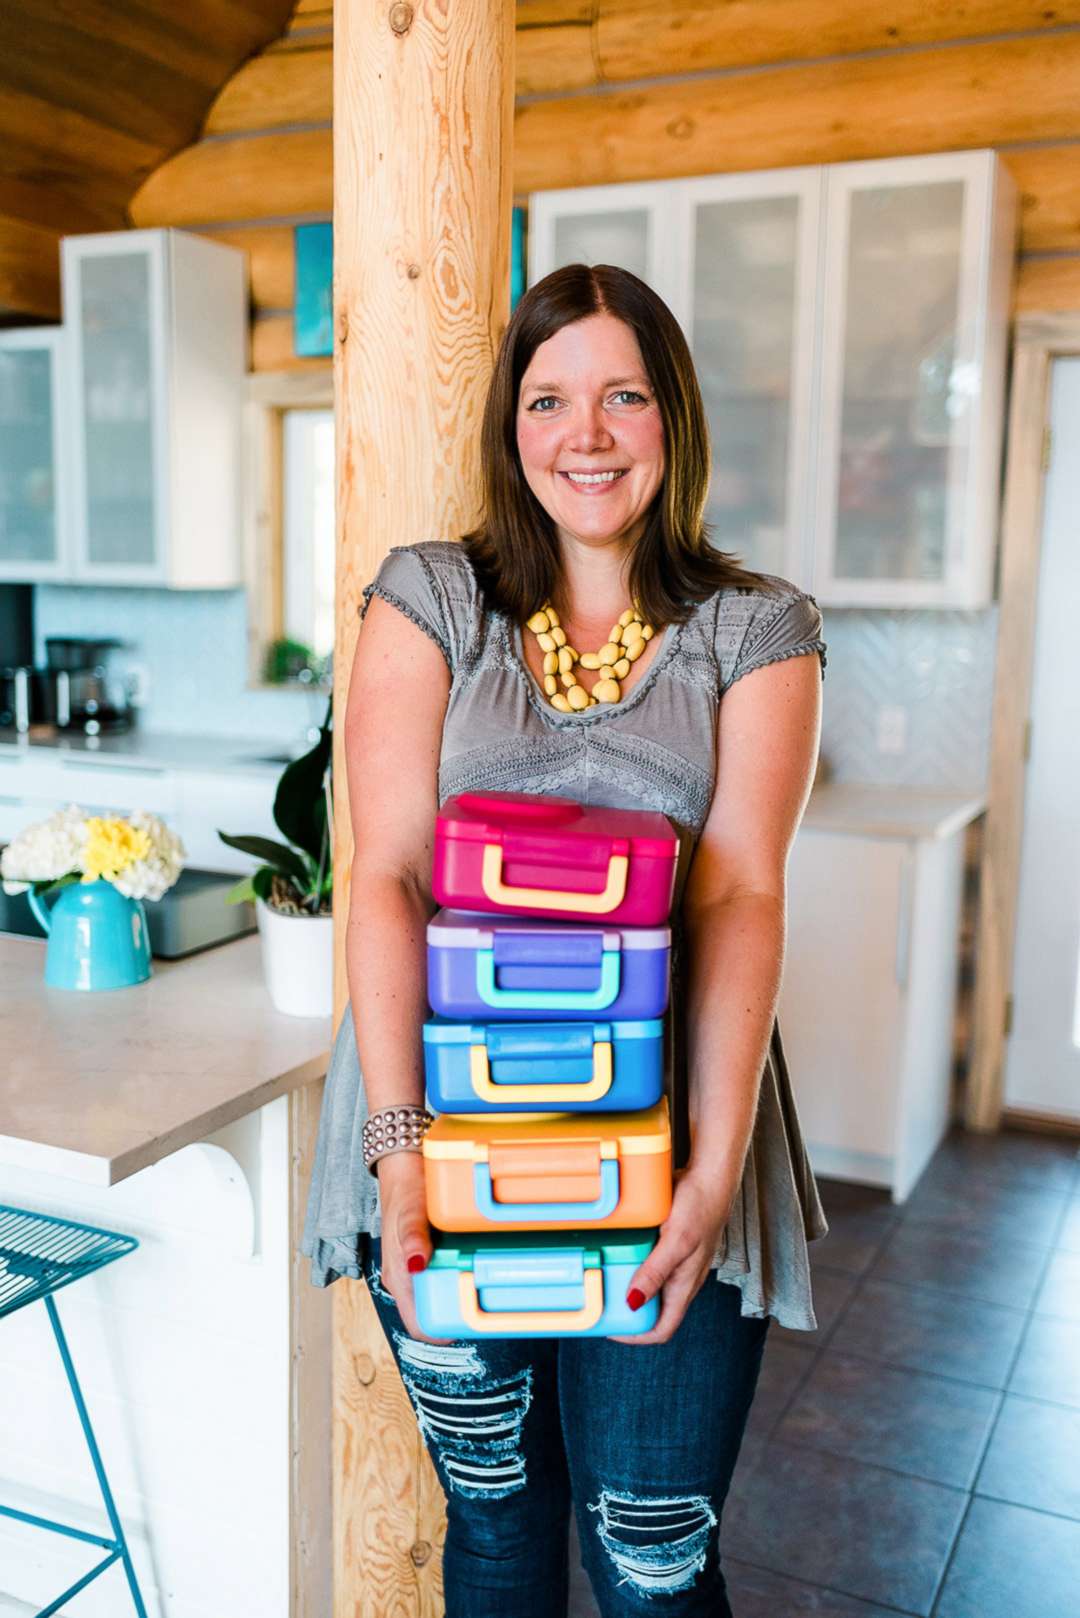 PHOTO: Foodie mama and lunchbox guru Kelly Pfeiffer assembles three-or-so lunches per week, which are themed by letters of the alphabet and shared on her Instagram page, noshandnourish.